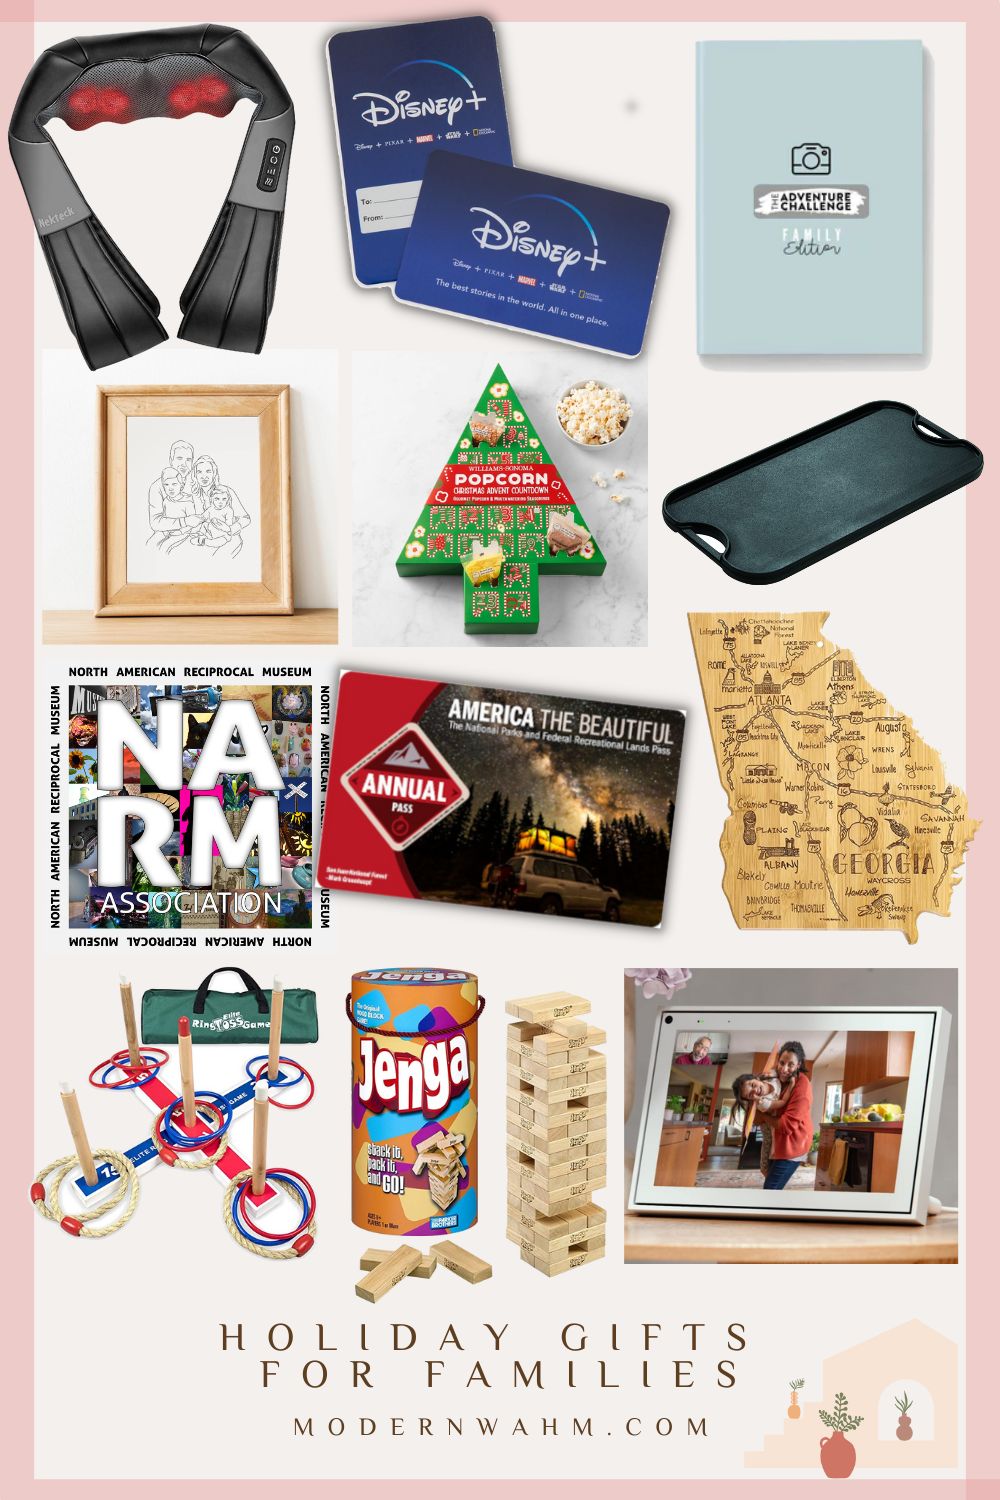 Modern WAHM Gift Guides 1